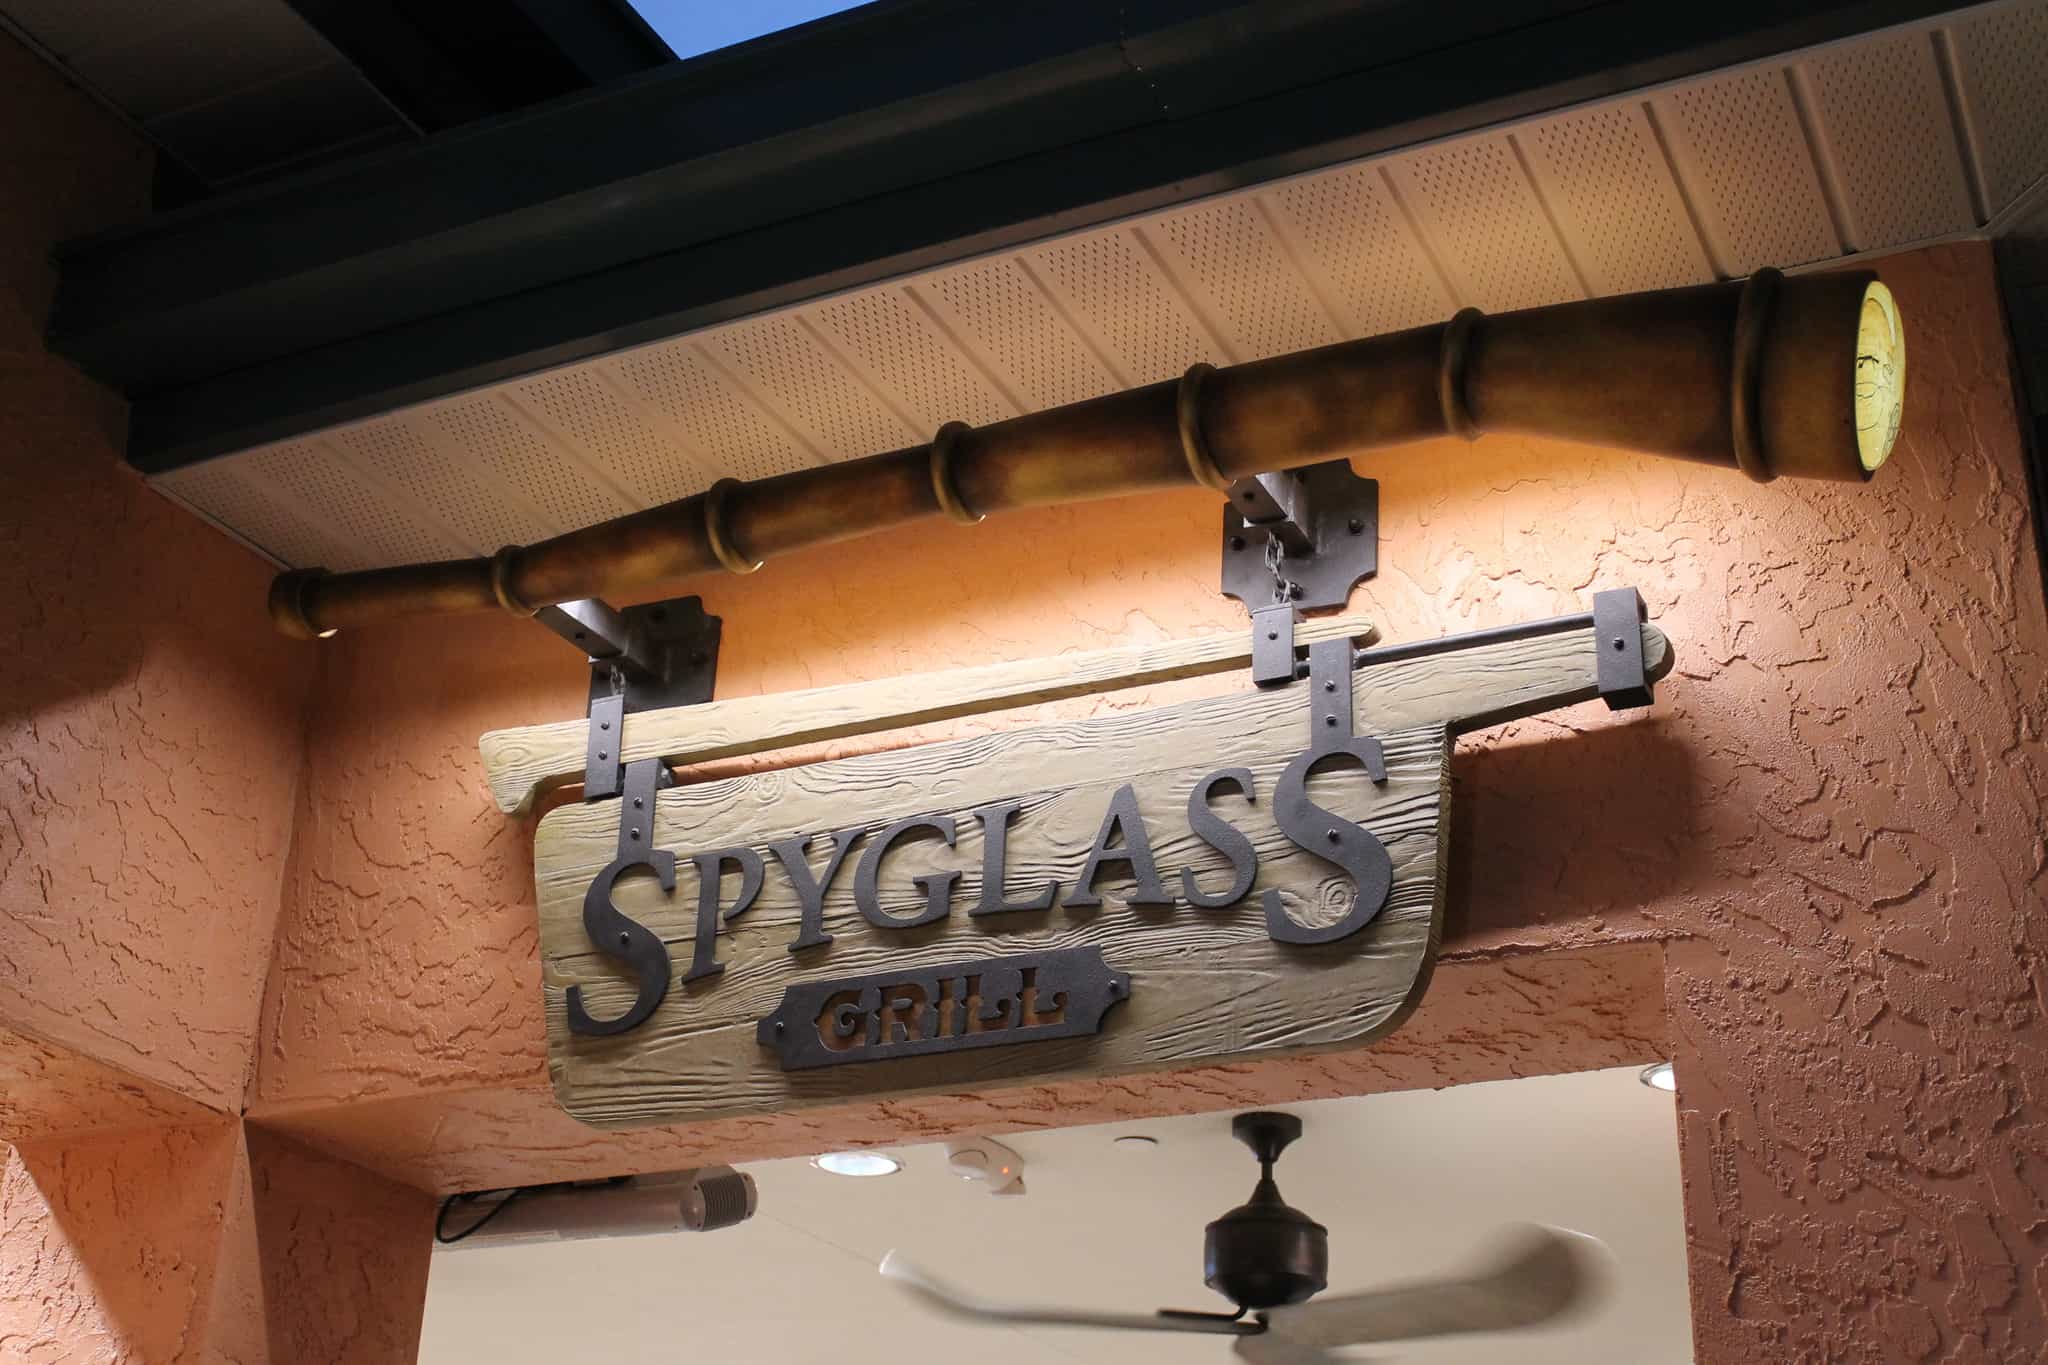 Spyglass Grill sign